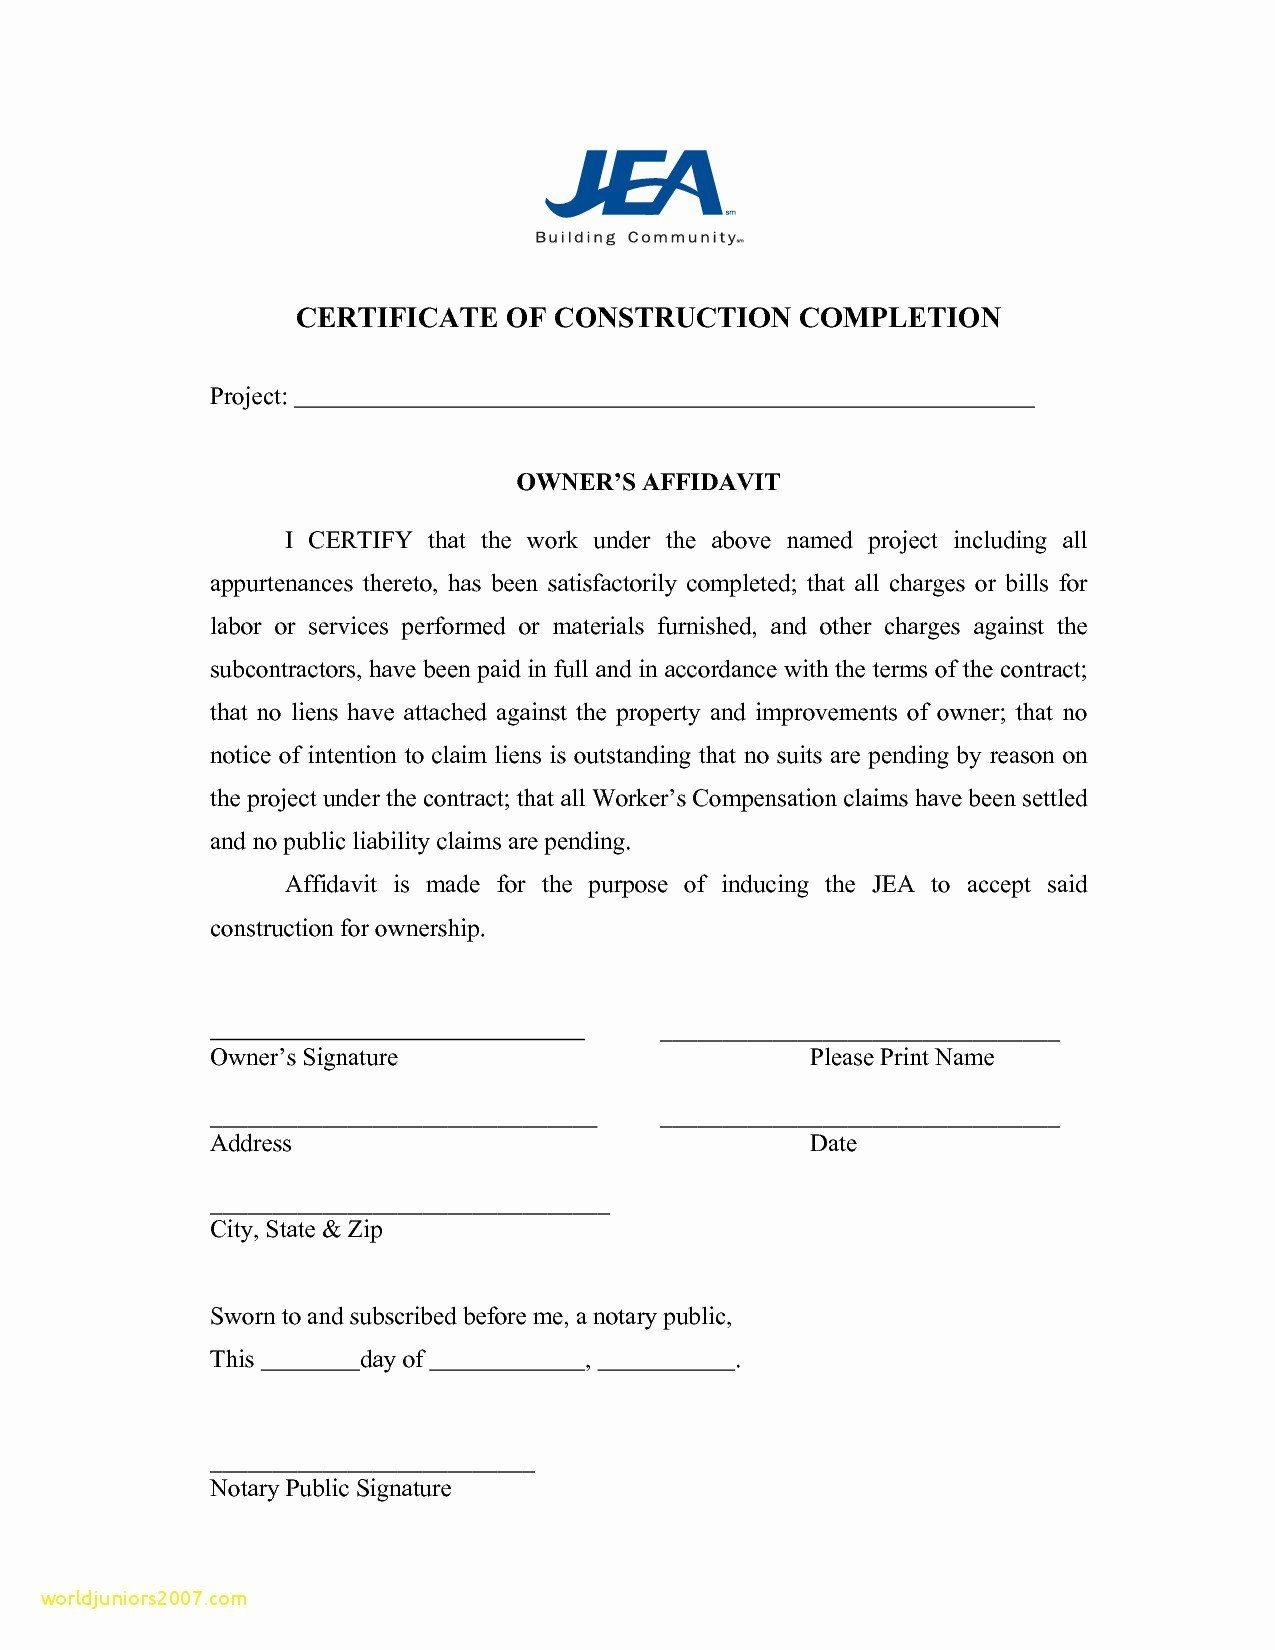 Letter Of Substantial Completion Template Examples  Letter Template throughout Practical Completion Certificate Template Jct